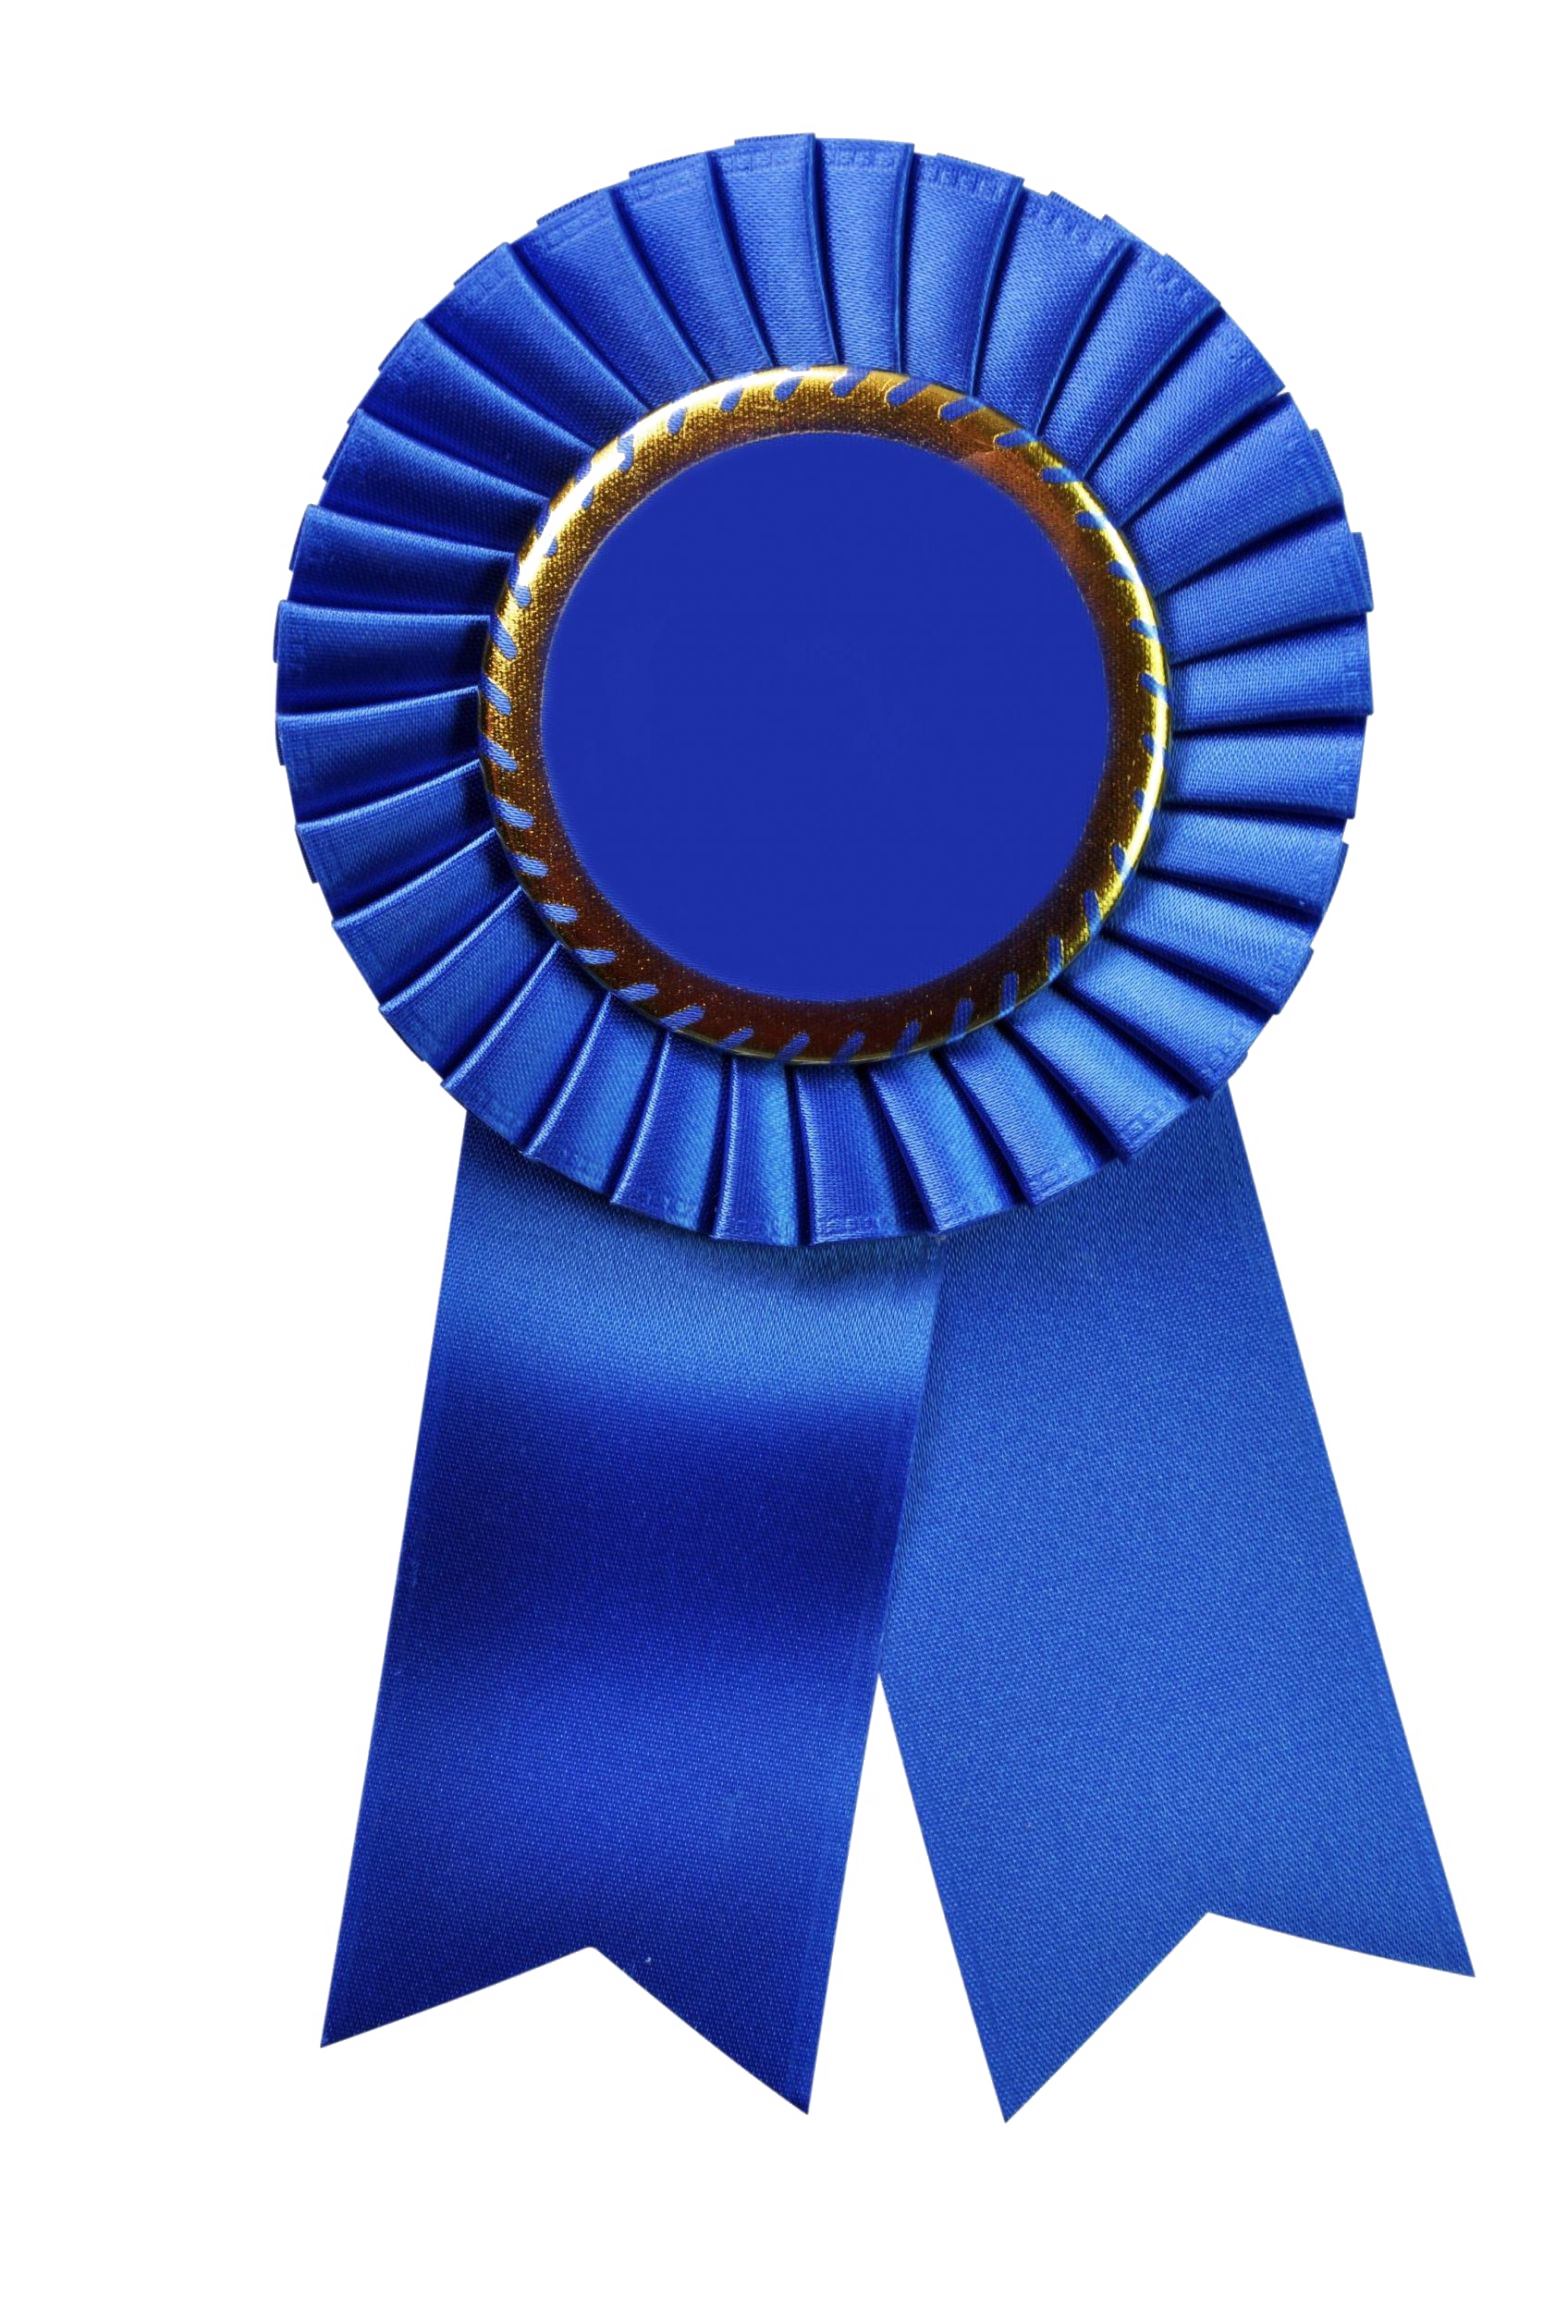 What Is A Blue Ribbon Event